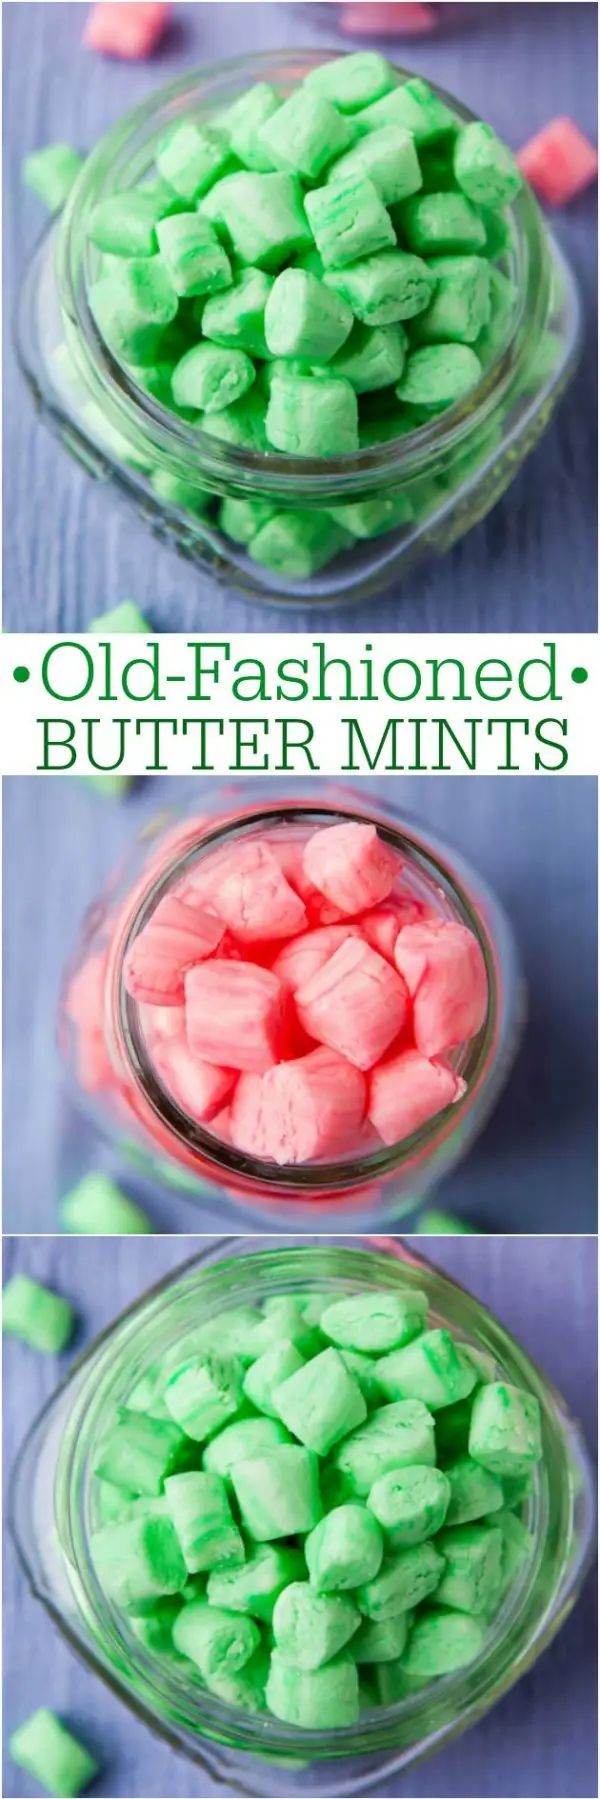 Old-Fashioned Butter Mints